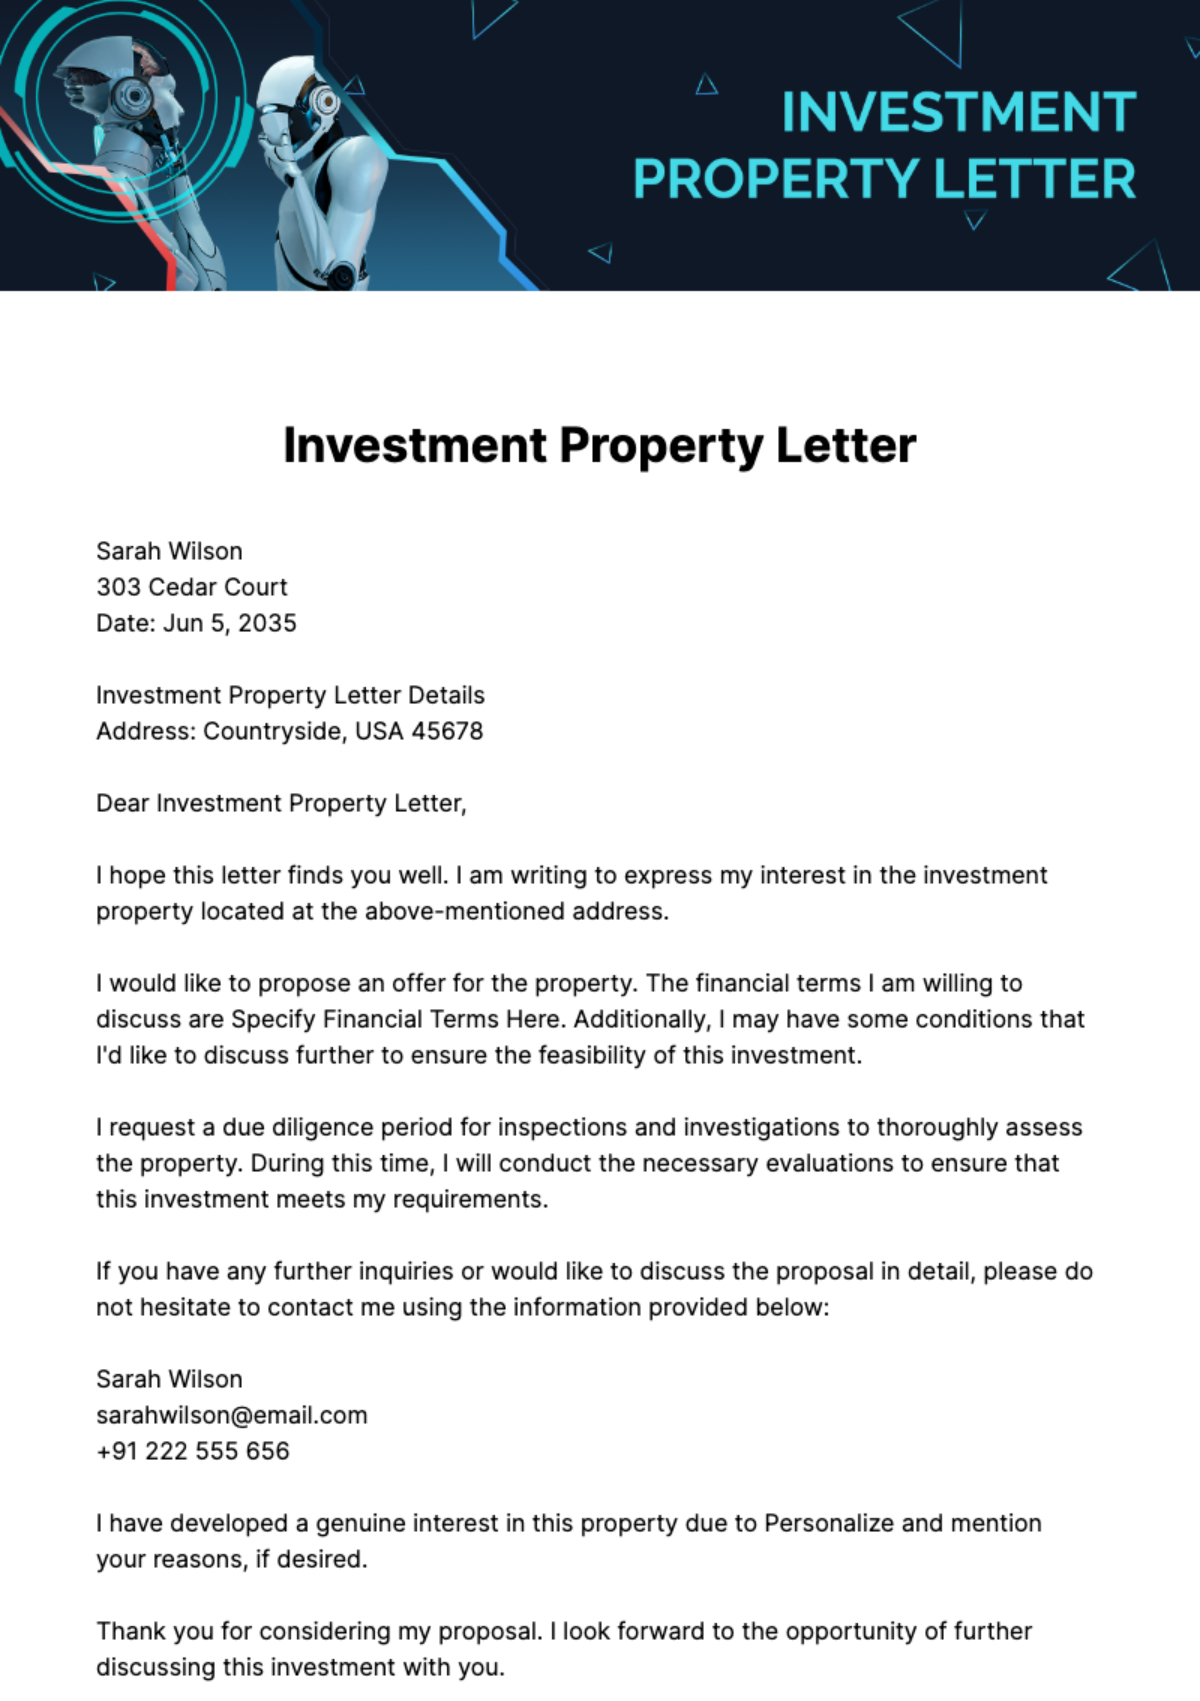 Investment Property Letter Template